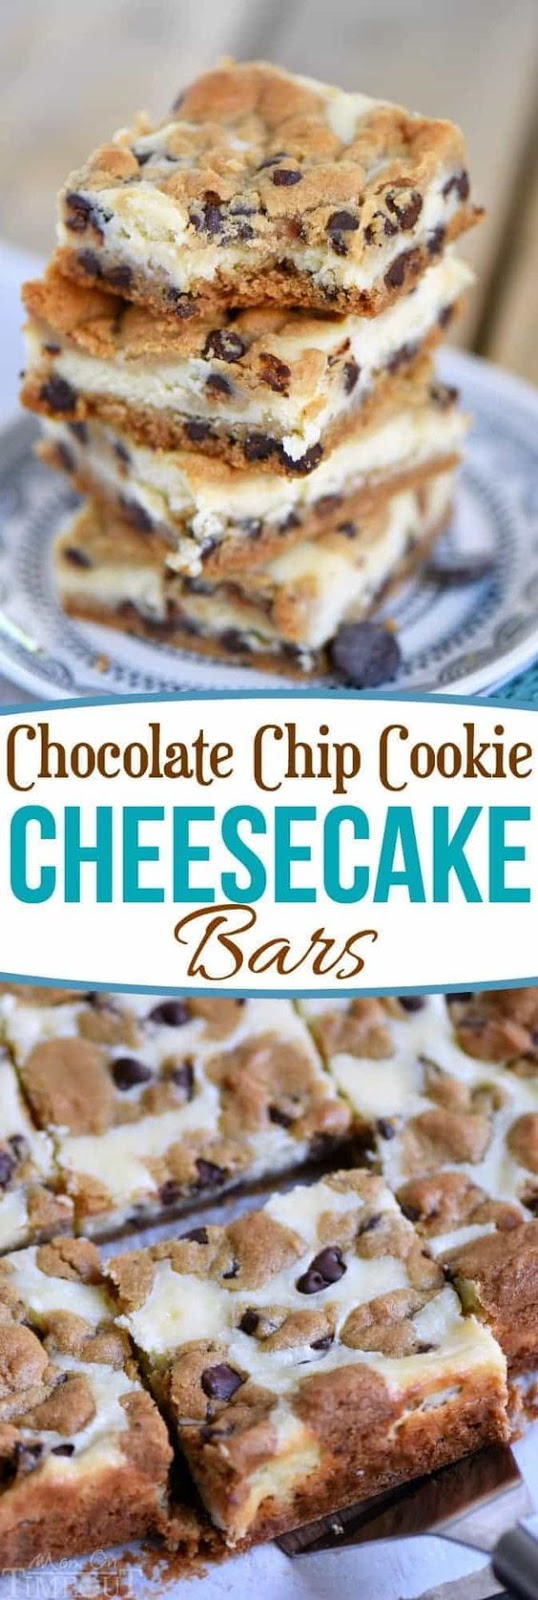 These easy Chocolate Chip Cookie Cheesecake Bars are made with just five ingredients! This easy dessert recipe will satisfy all your cravings and is PERFECT for parties, bake sales, cookie trays and more! // Mom On Timeout #desserts #dessert #baking #cheesecake #chocolate #chocolatechipcookies #bars #sweets #cookies #easy #recipe #recipes #momontimeout